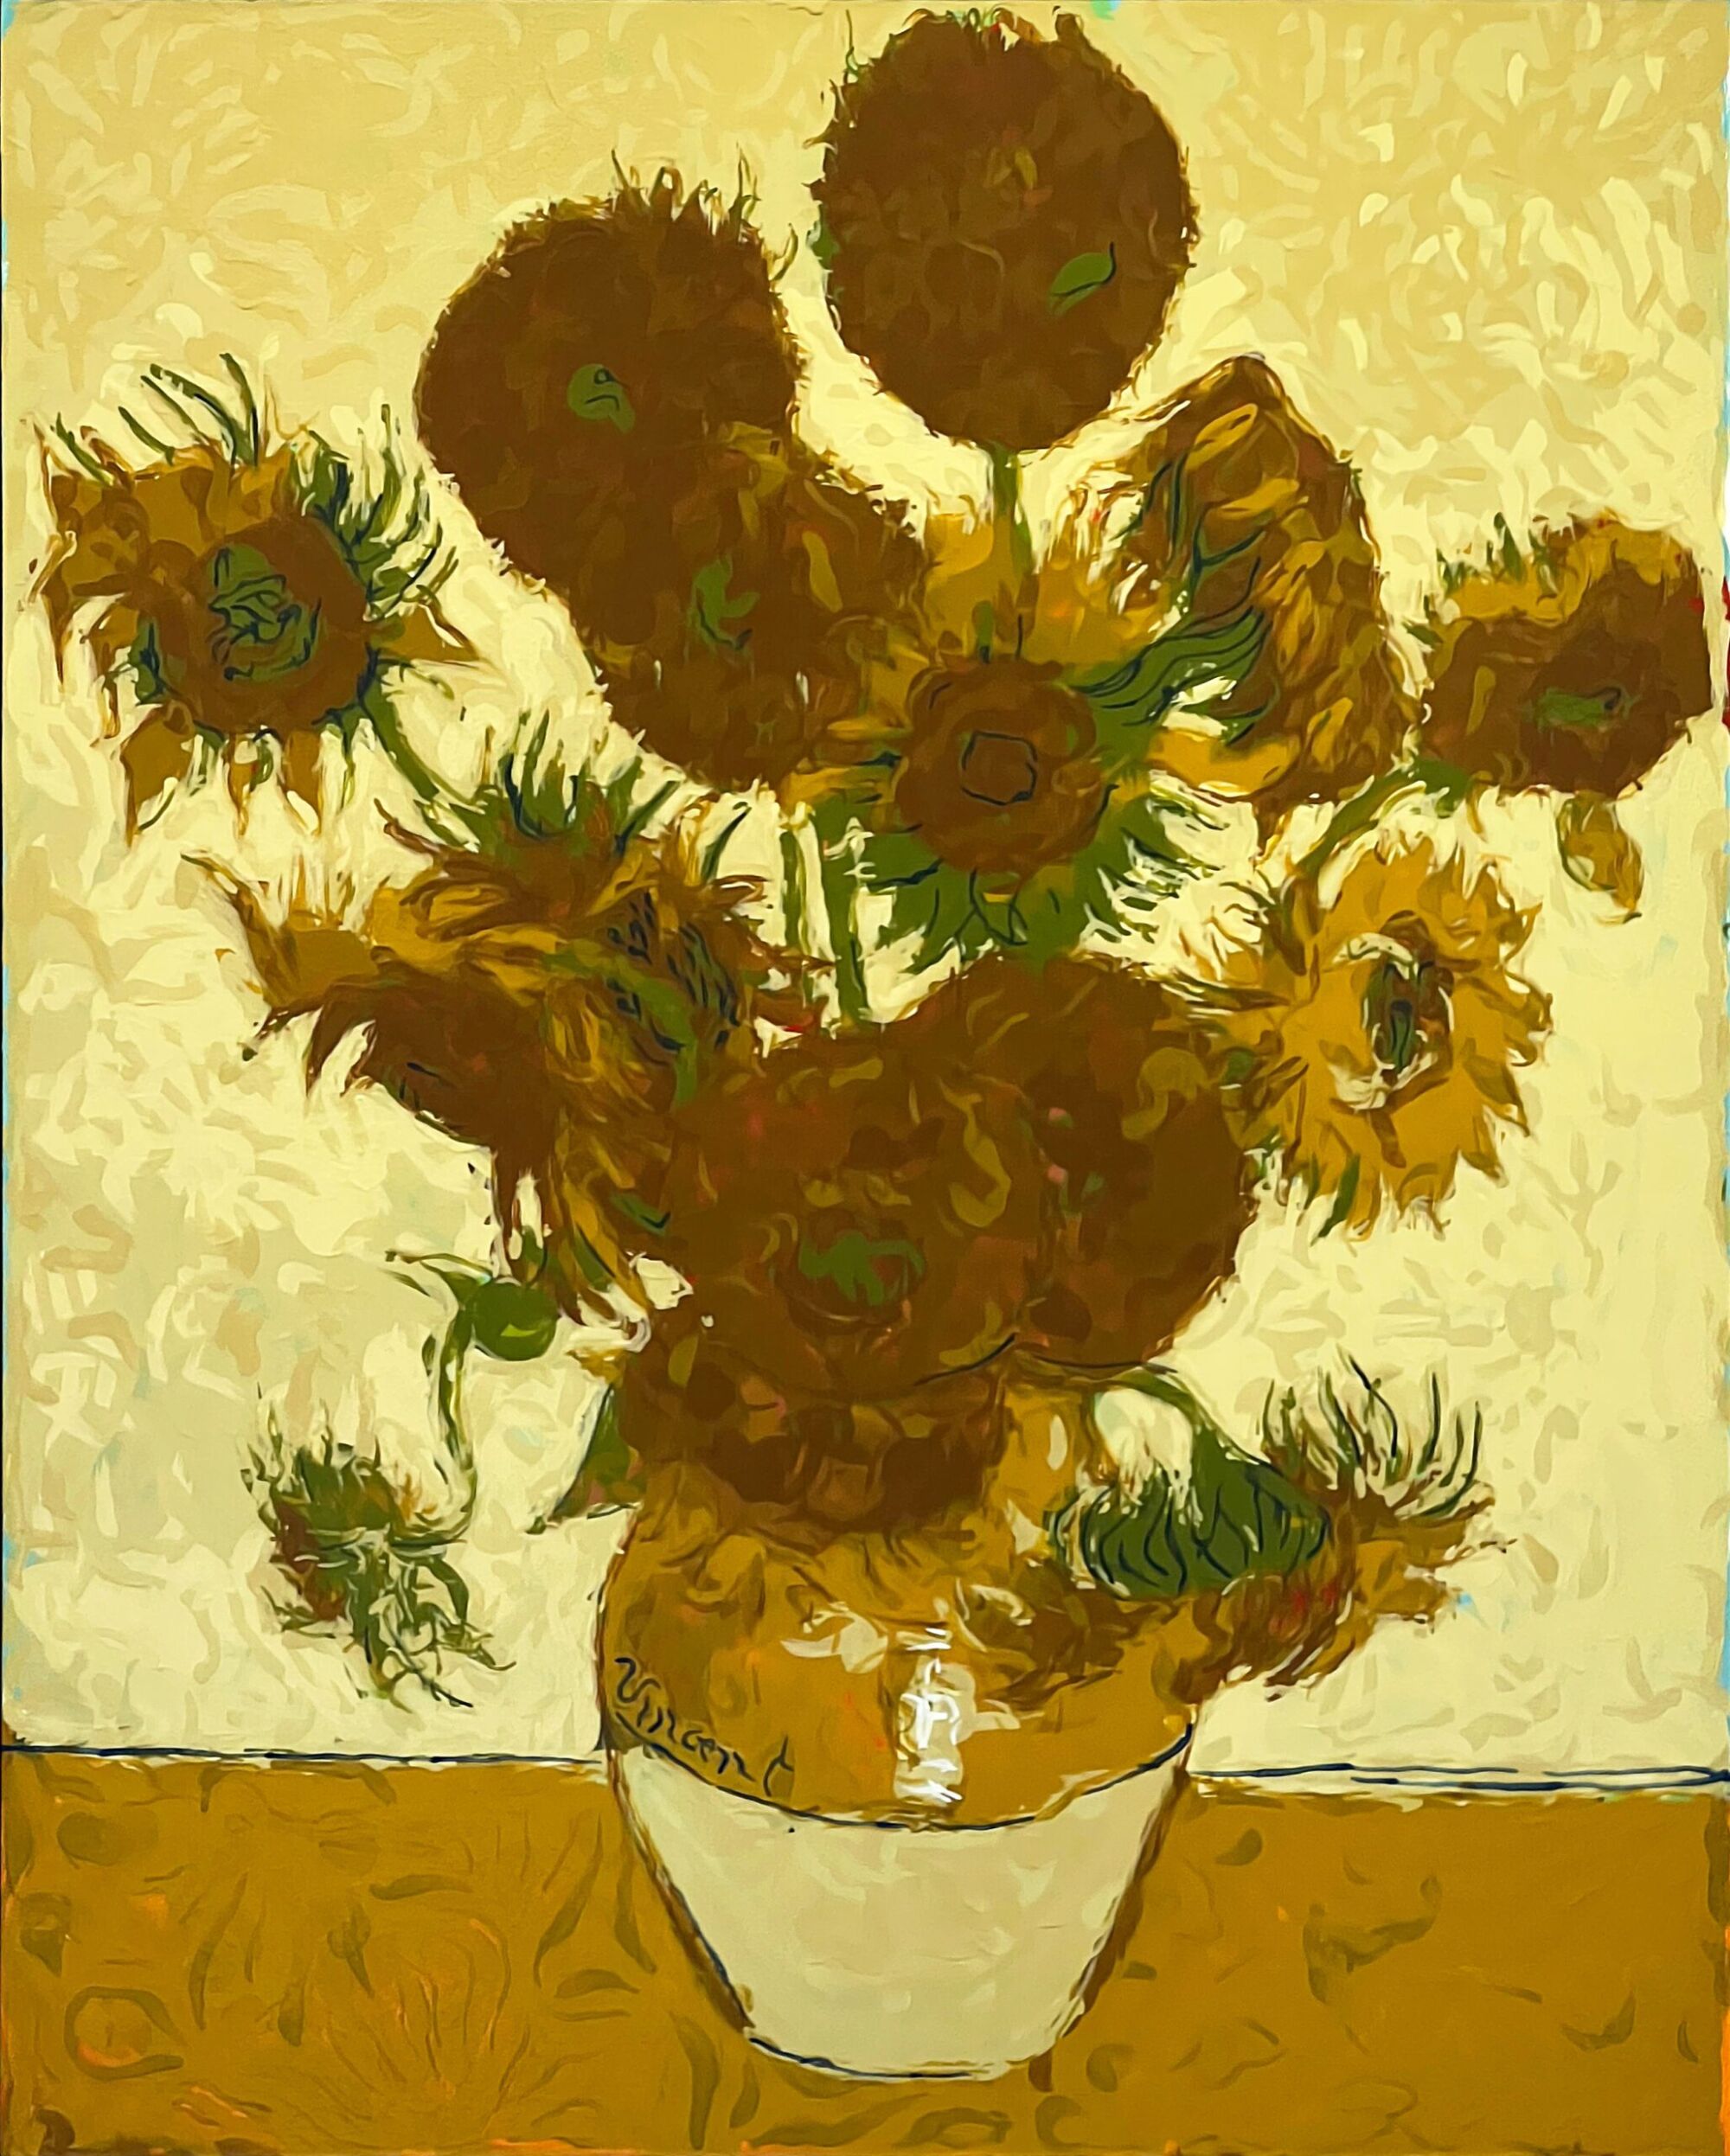 The Wick - ROB AND NICK CARTER, SUNFLOWERS ROBOT PAINTING, AFTER VINCENT VAN GOGH (1853-90), 2021